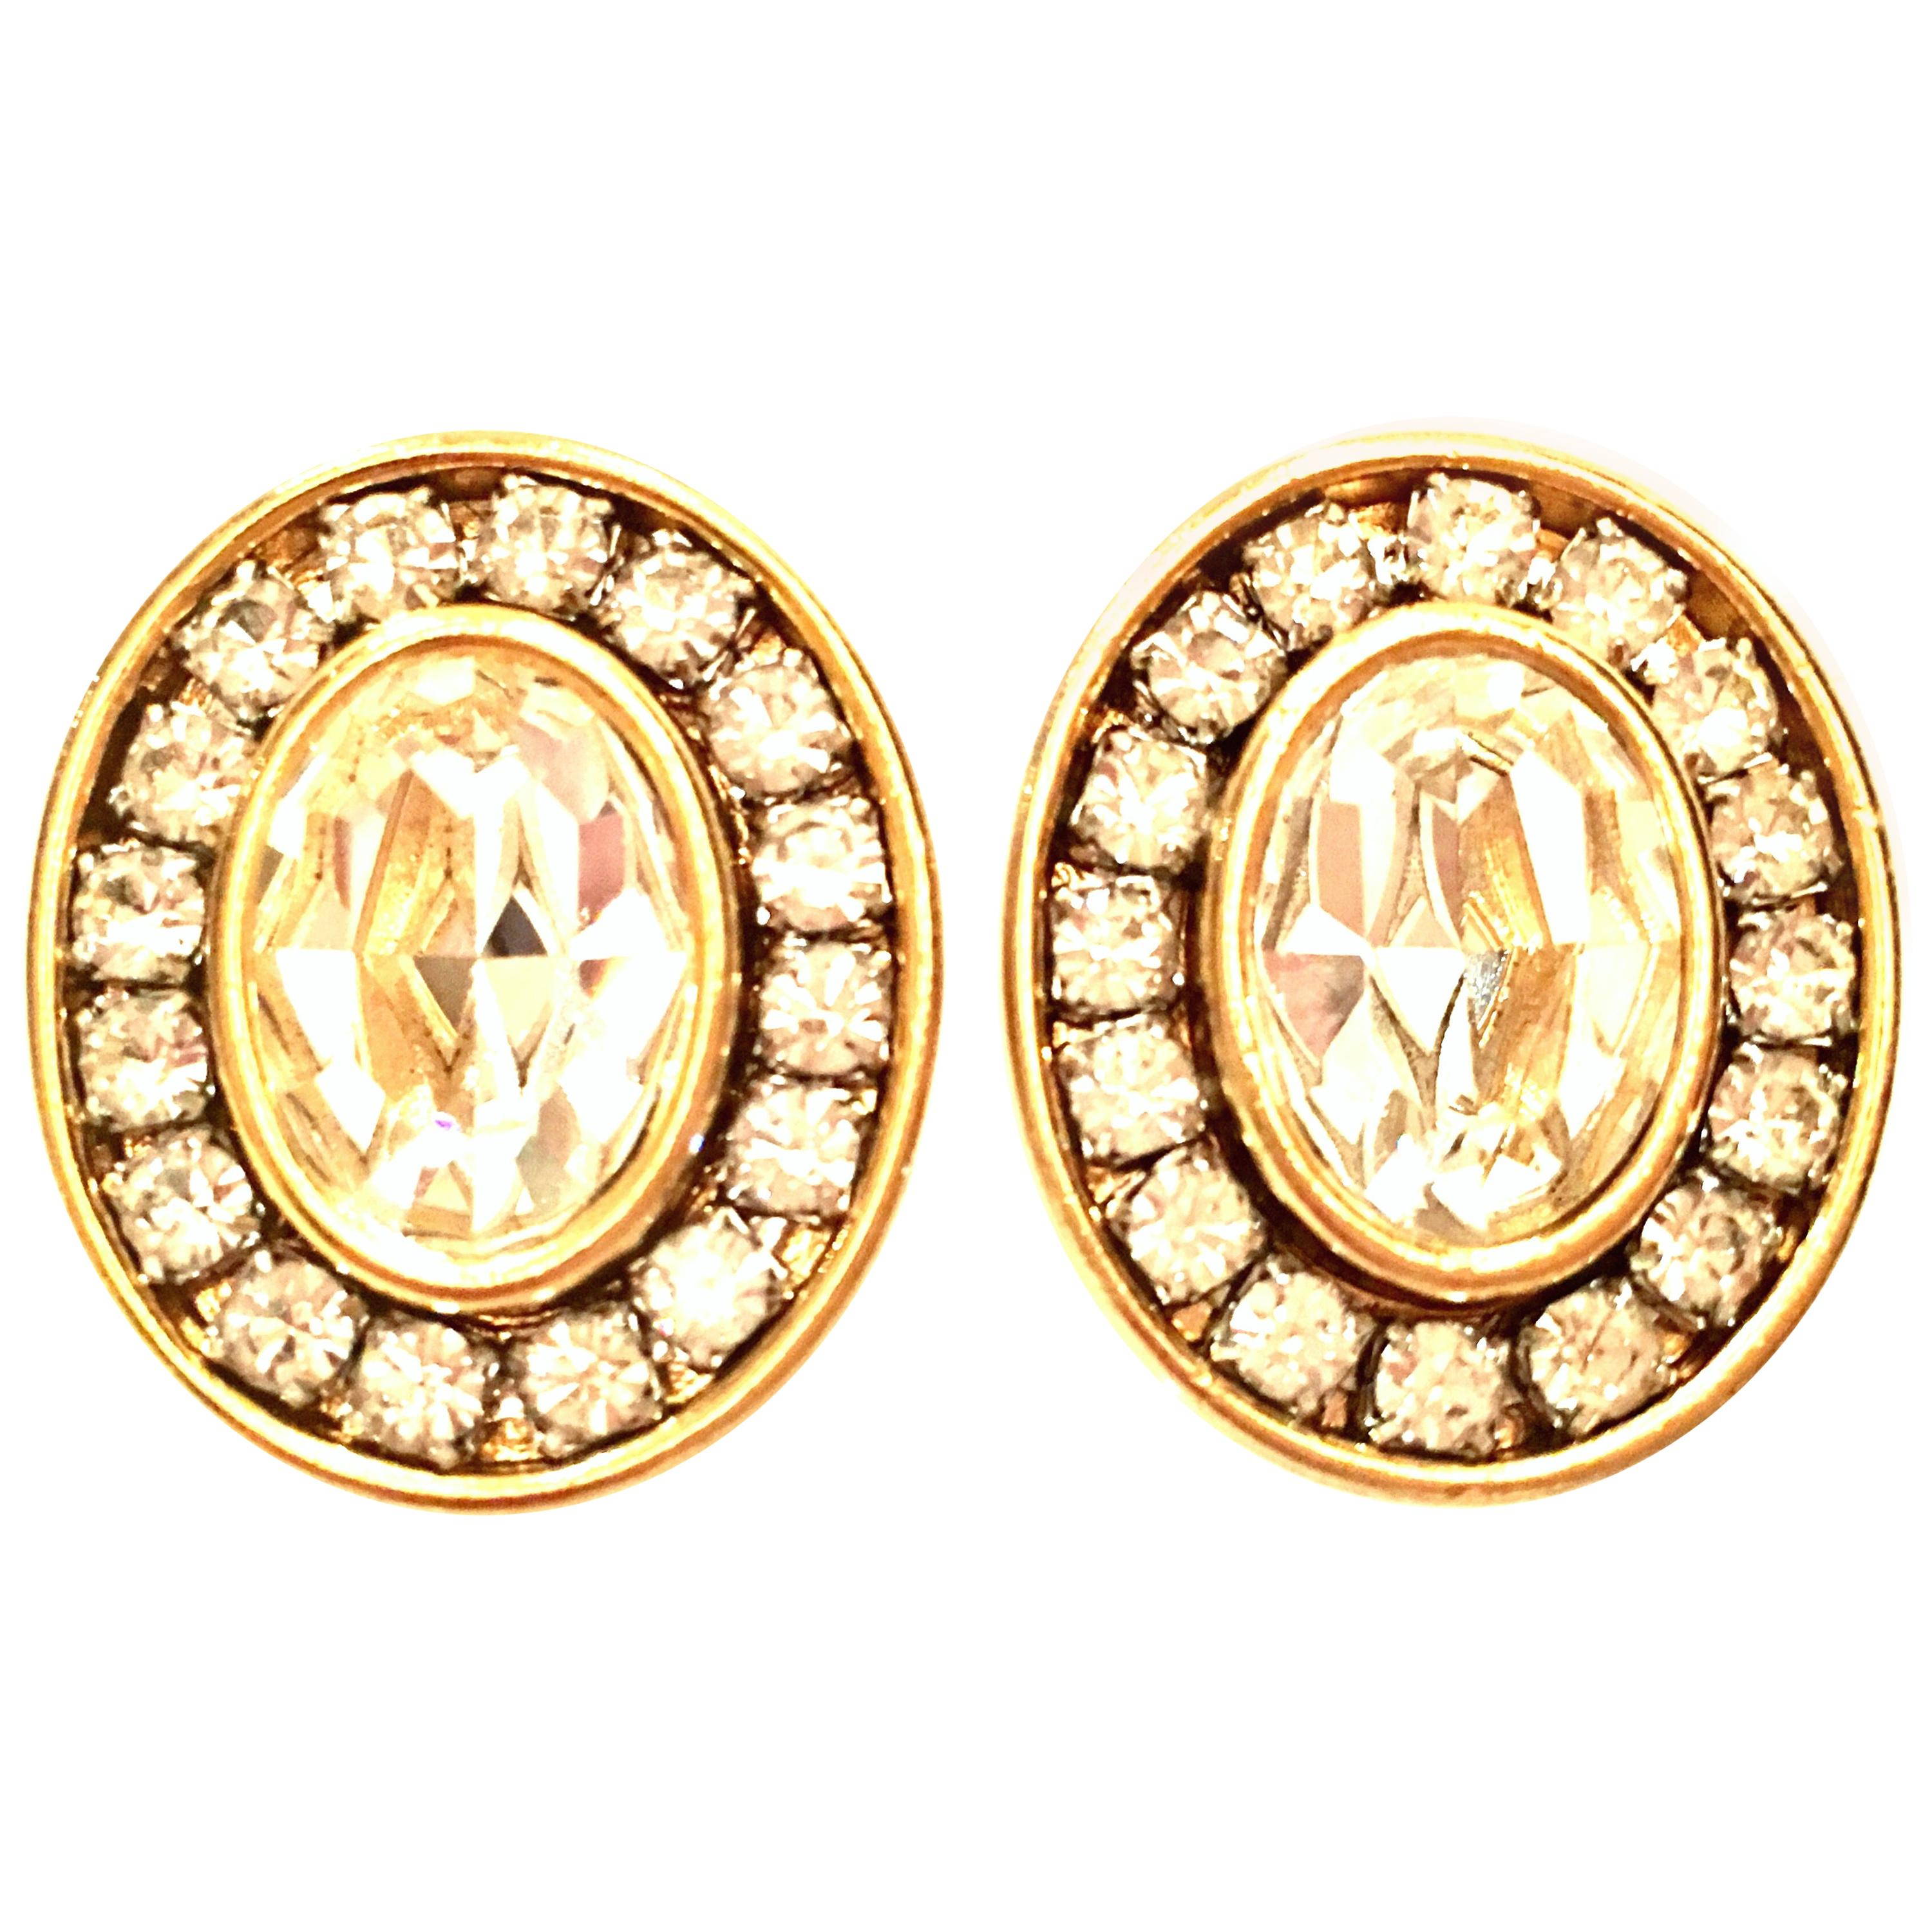 20th Century Gold and Swarovski Crystal Earrings By, Givenchy For Sale ...